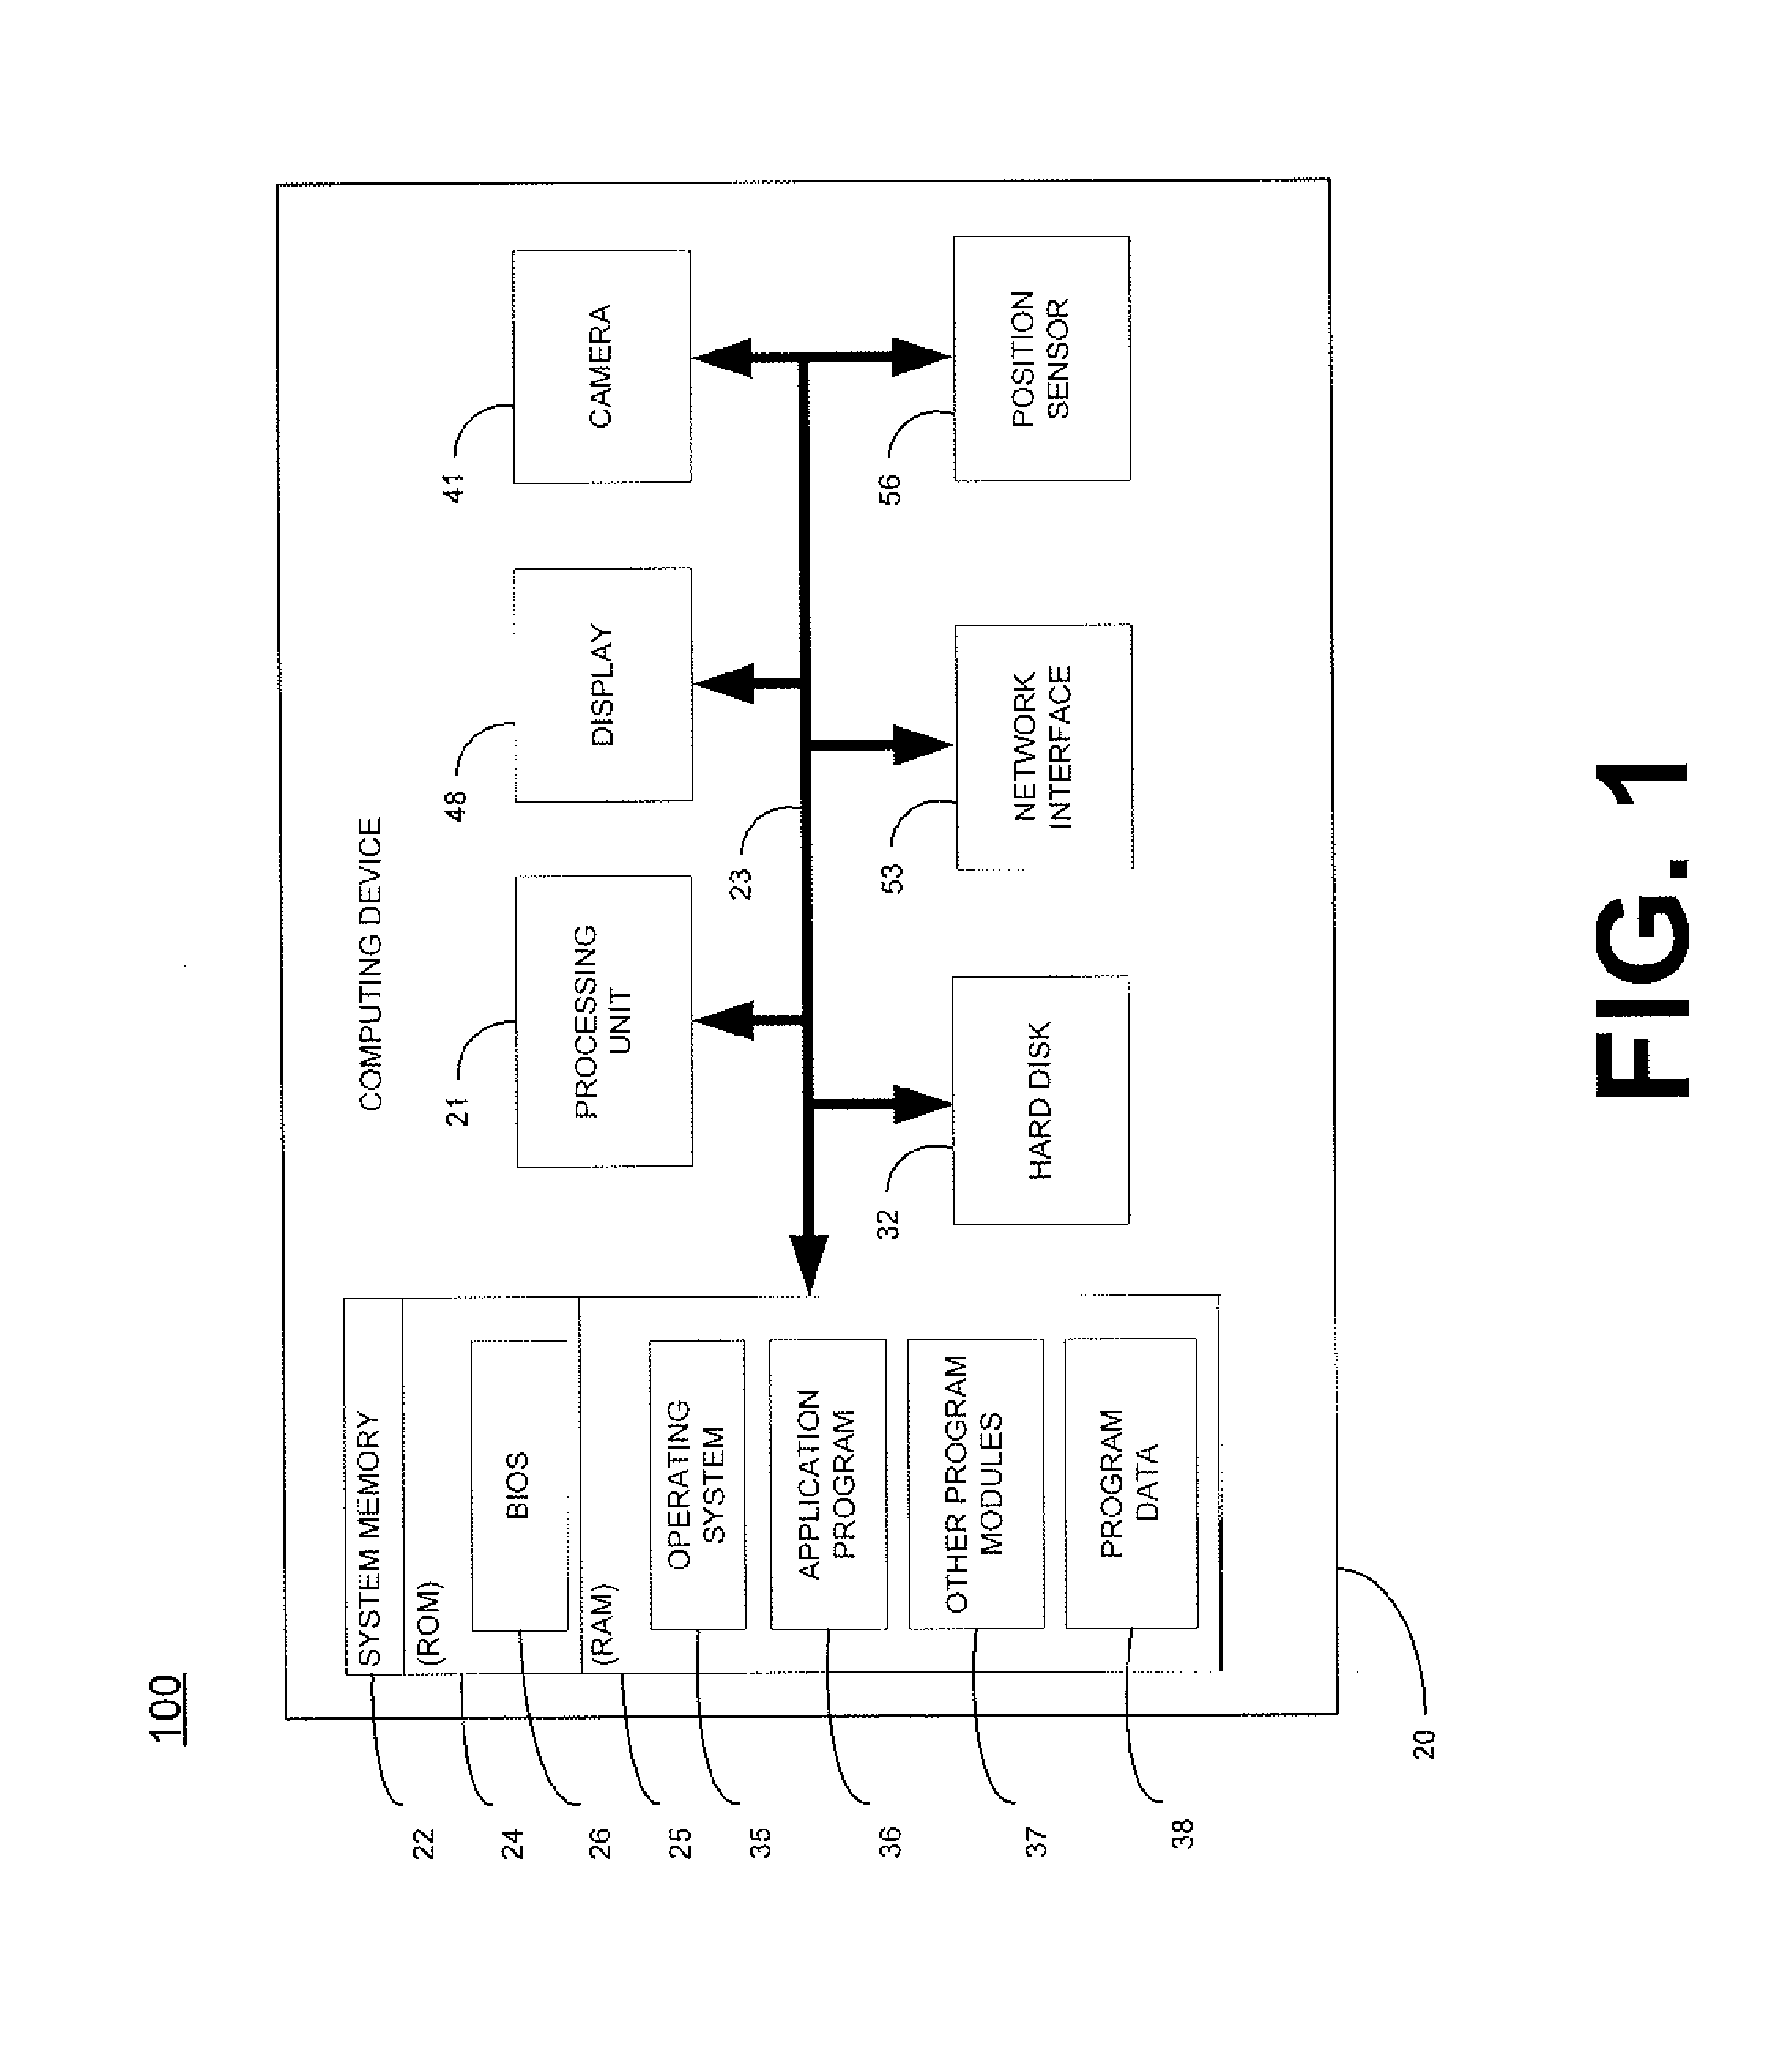 Mobile Application for Providing Vehicle Information to Users